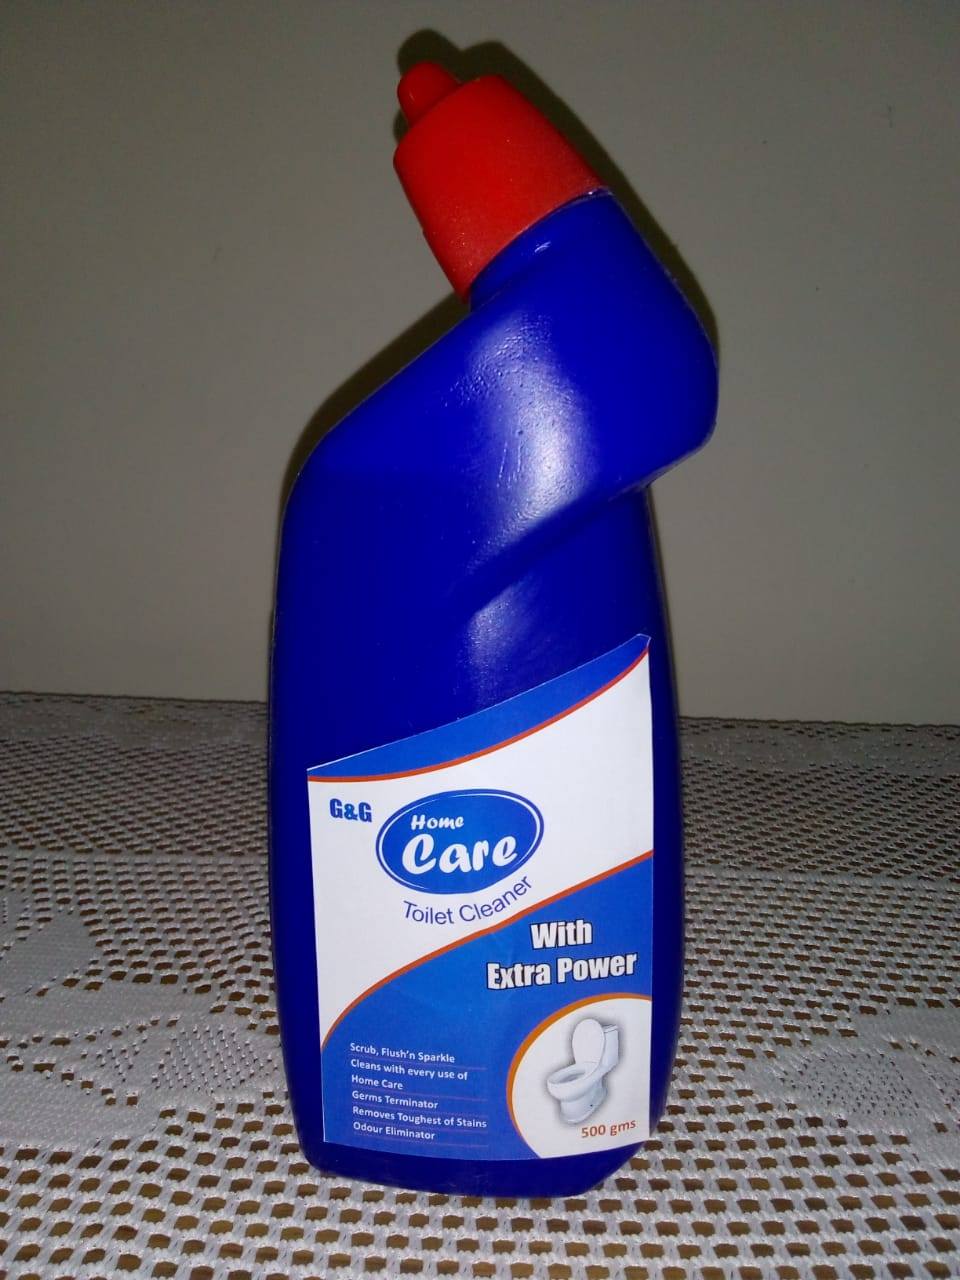 Toilet Cleaner from G&G Hygiene and Cleaning Products